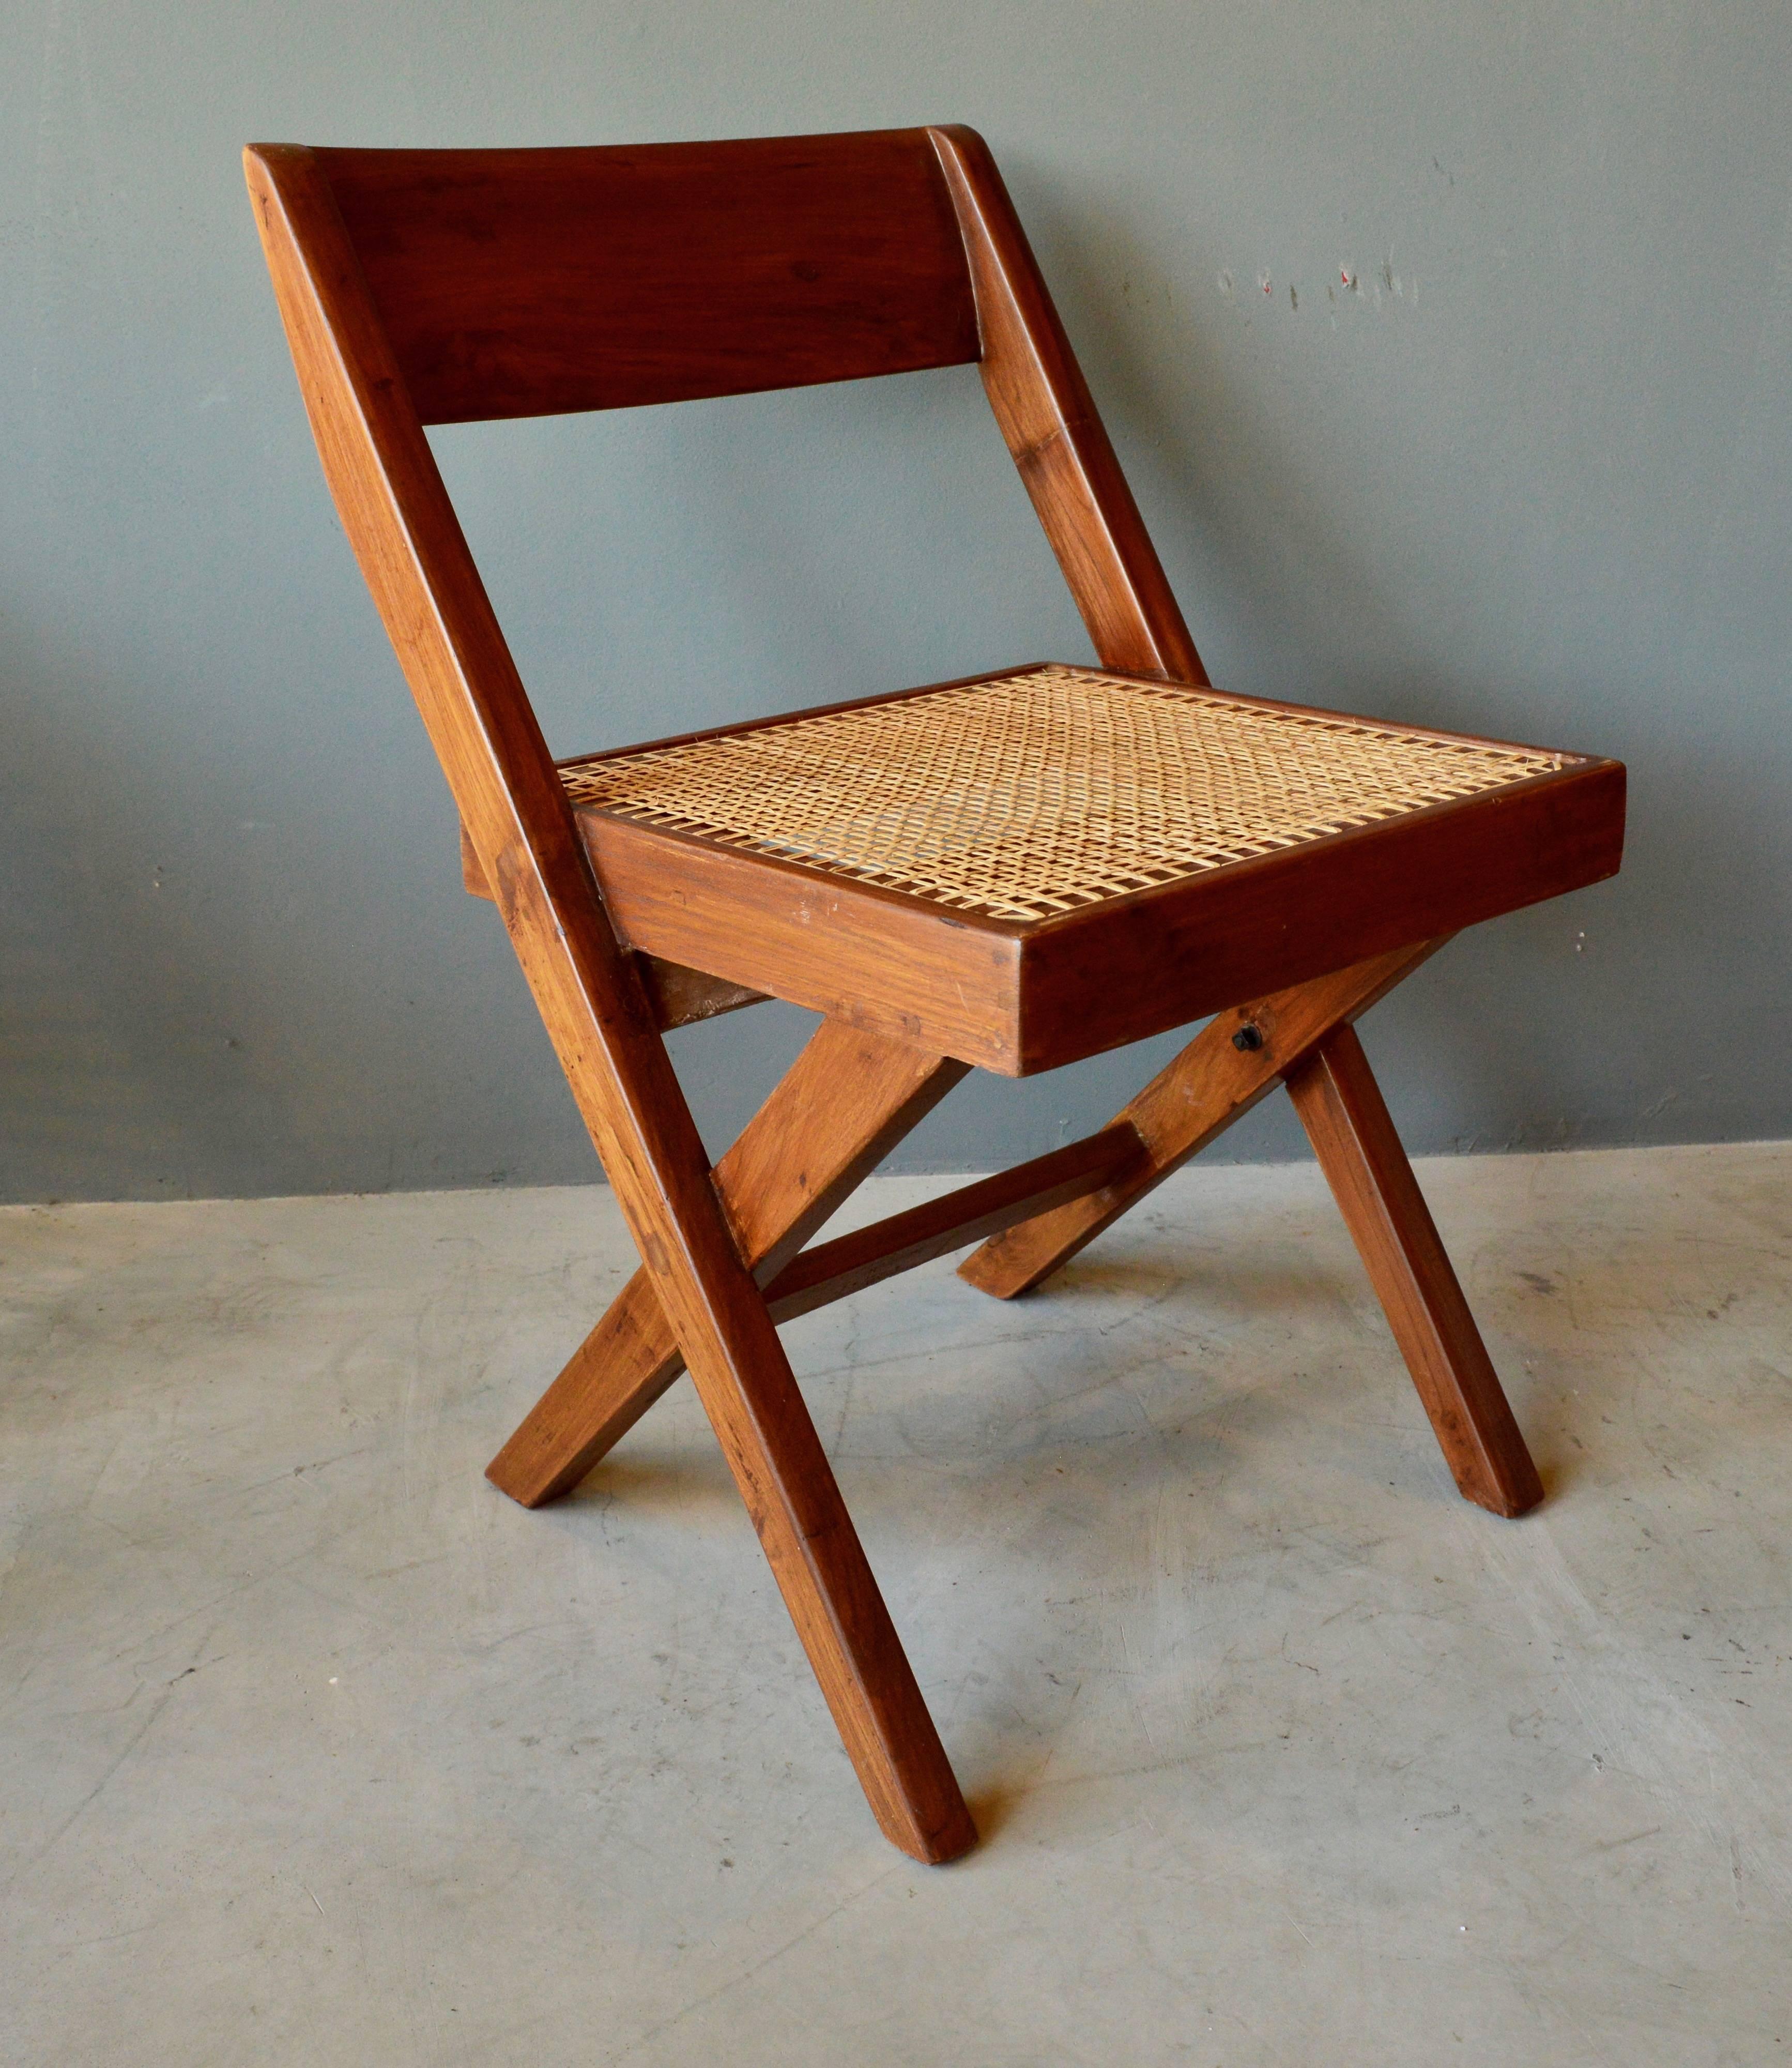 Cane Pierre Jeanneret Library Chair